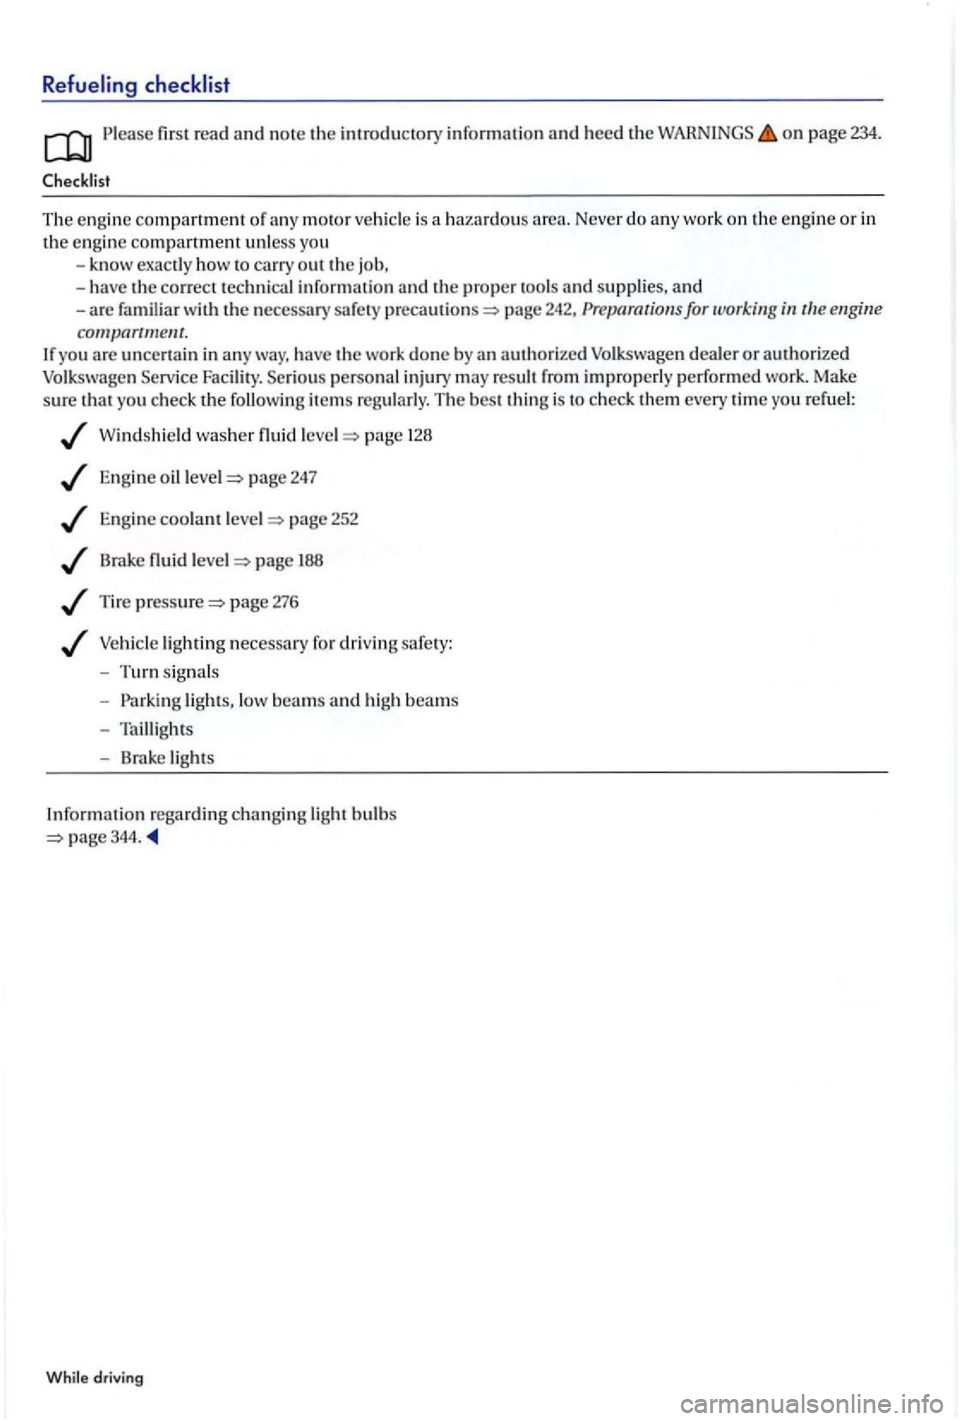 VOLKSWAGEN GOLF PLUS 2004  Owners Manual Refueling checklist 
first  rea d an d note the introductory information and heed the on page  234. 
The  engi ne compartment of moto r vehicle  is  a  haza rdous engine or in the engin e compartment 